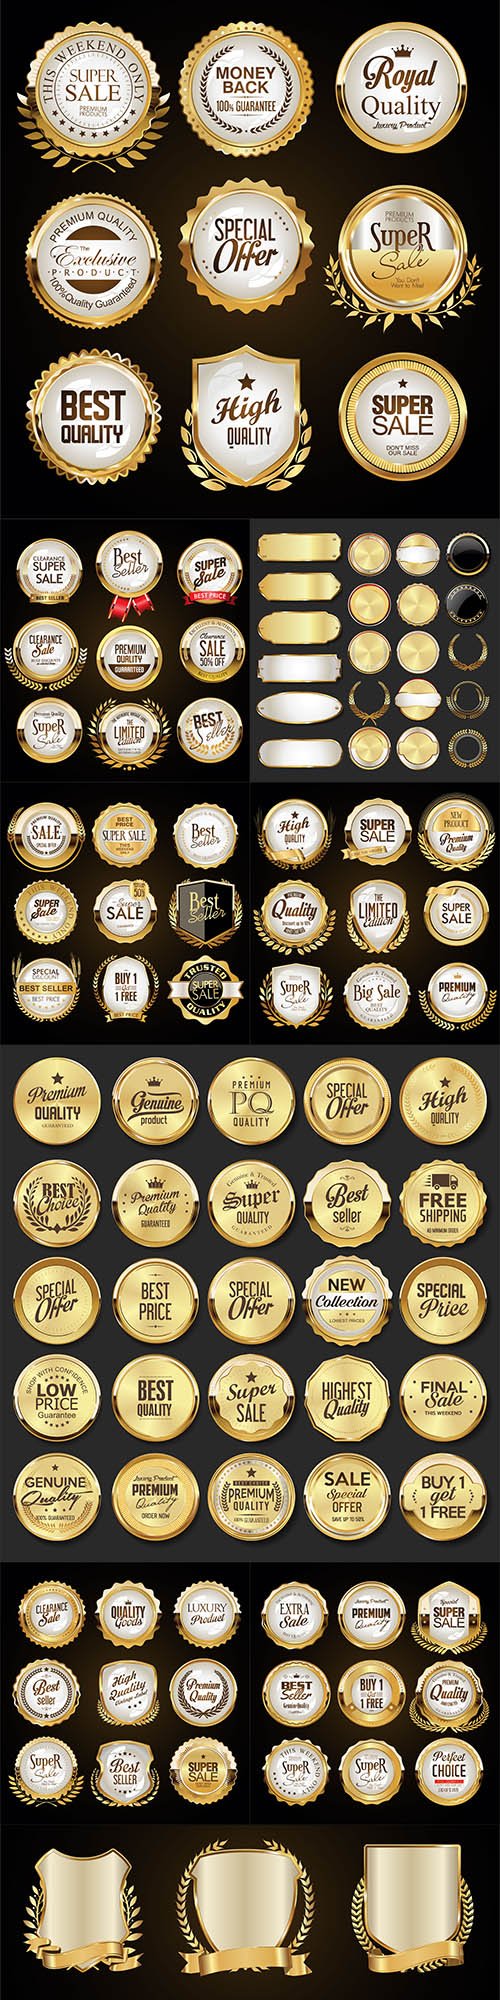 Premium quality gold badges and labels collection 34